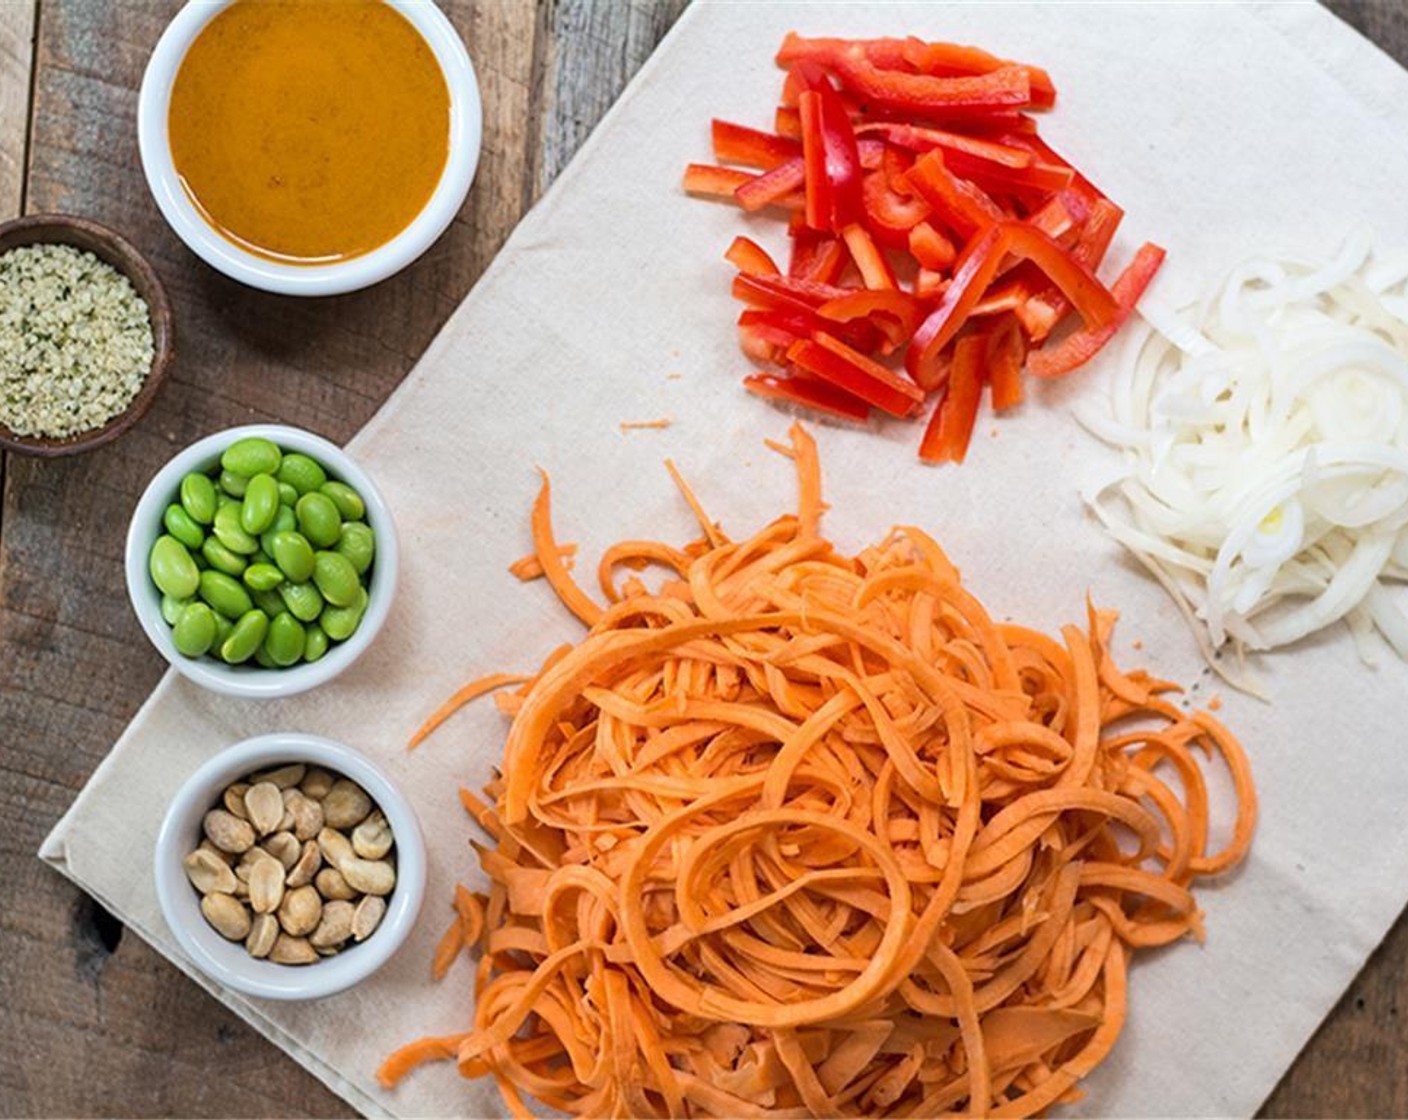 step 1 Use a spiralizer to make long strips out of the Sweet Potatoes (2).